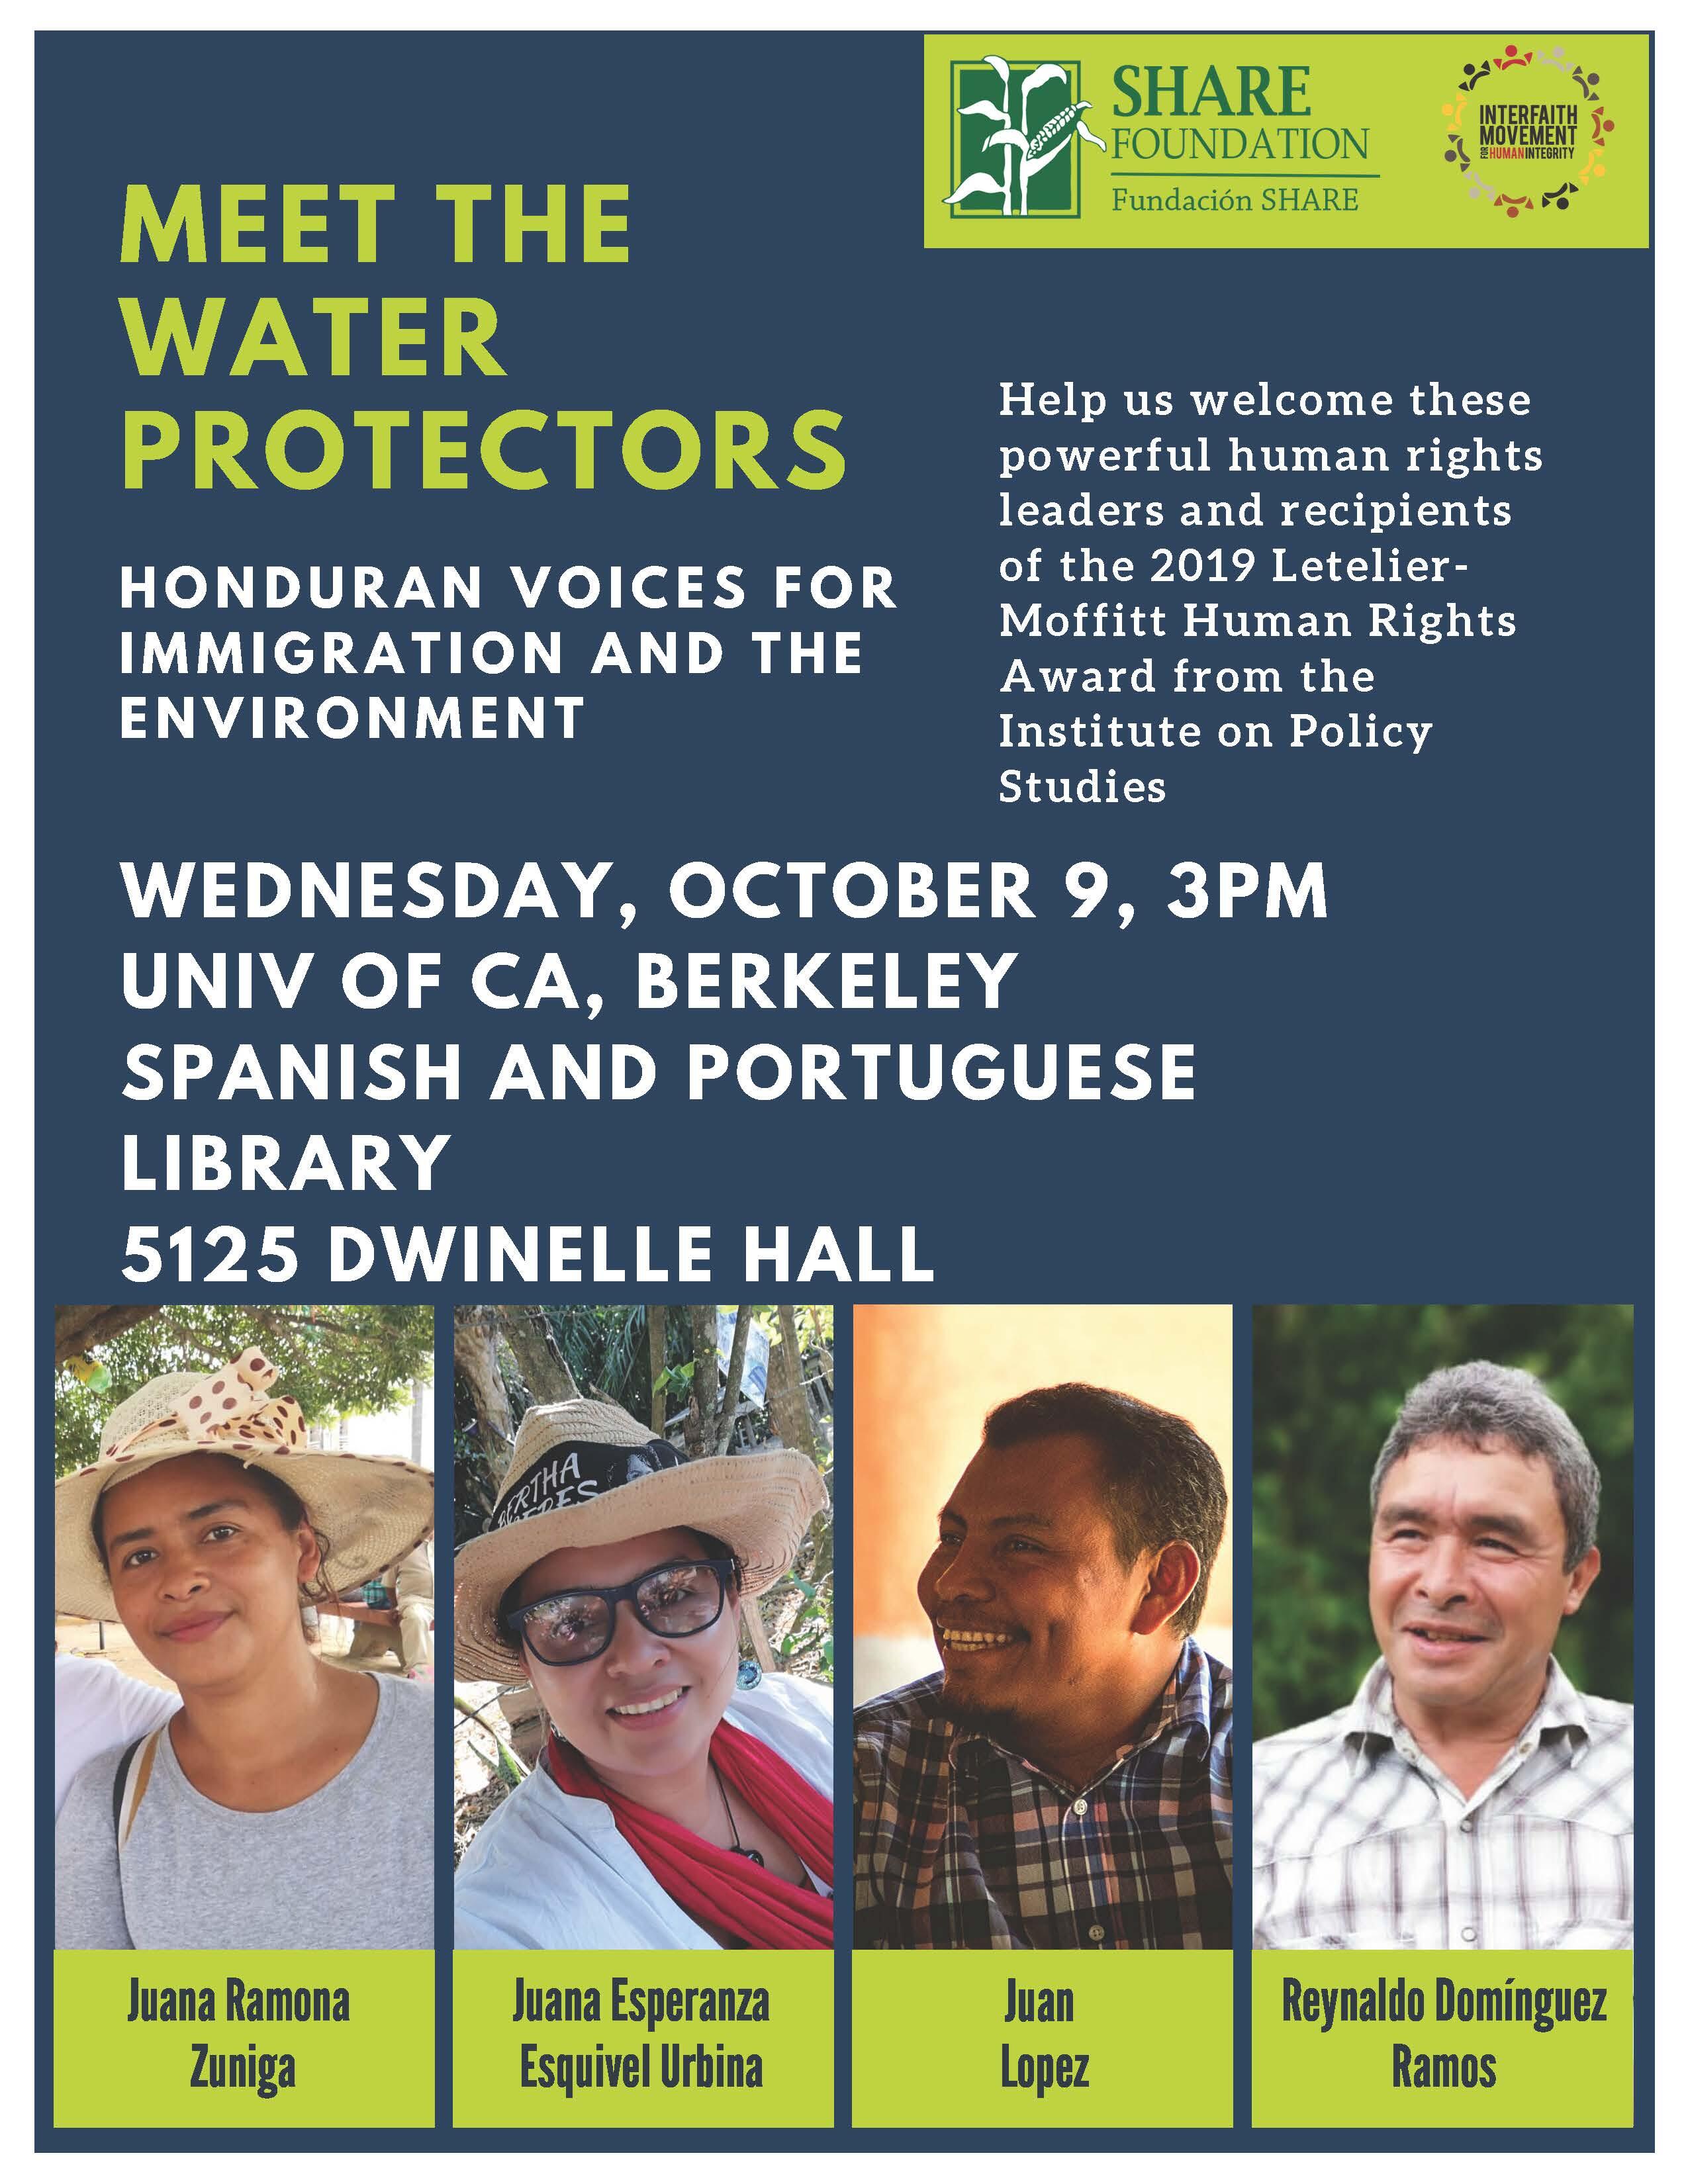 Meet the Water Protectors – Honduran Voices for Immigration and the Environment